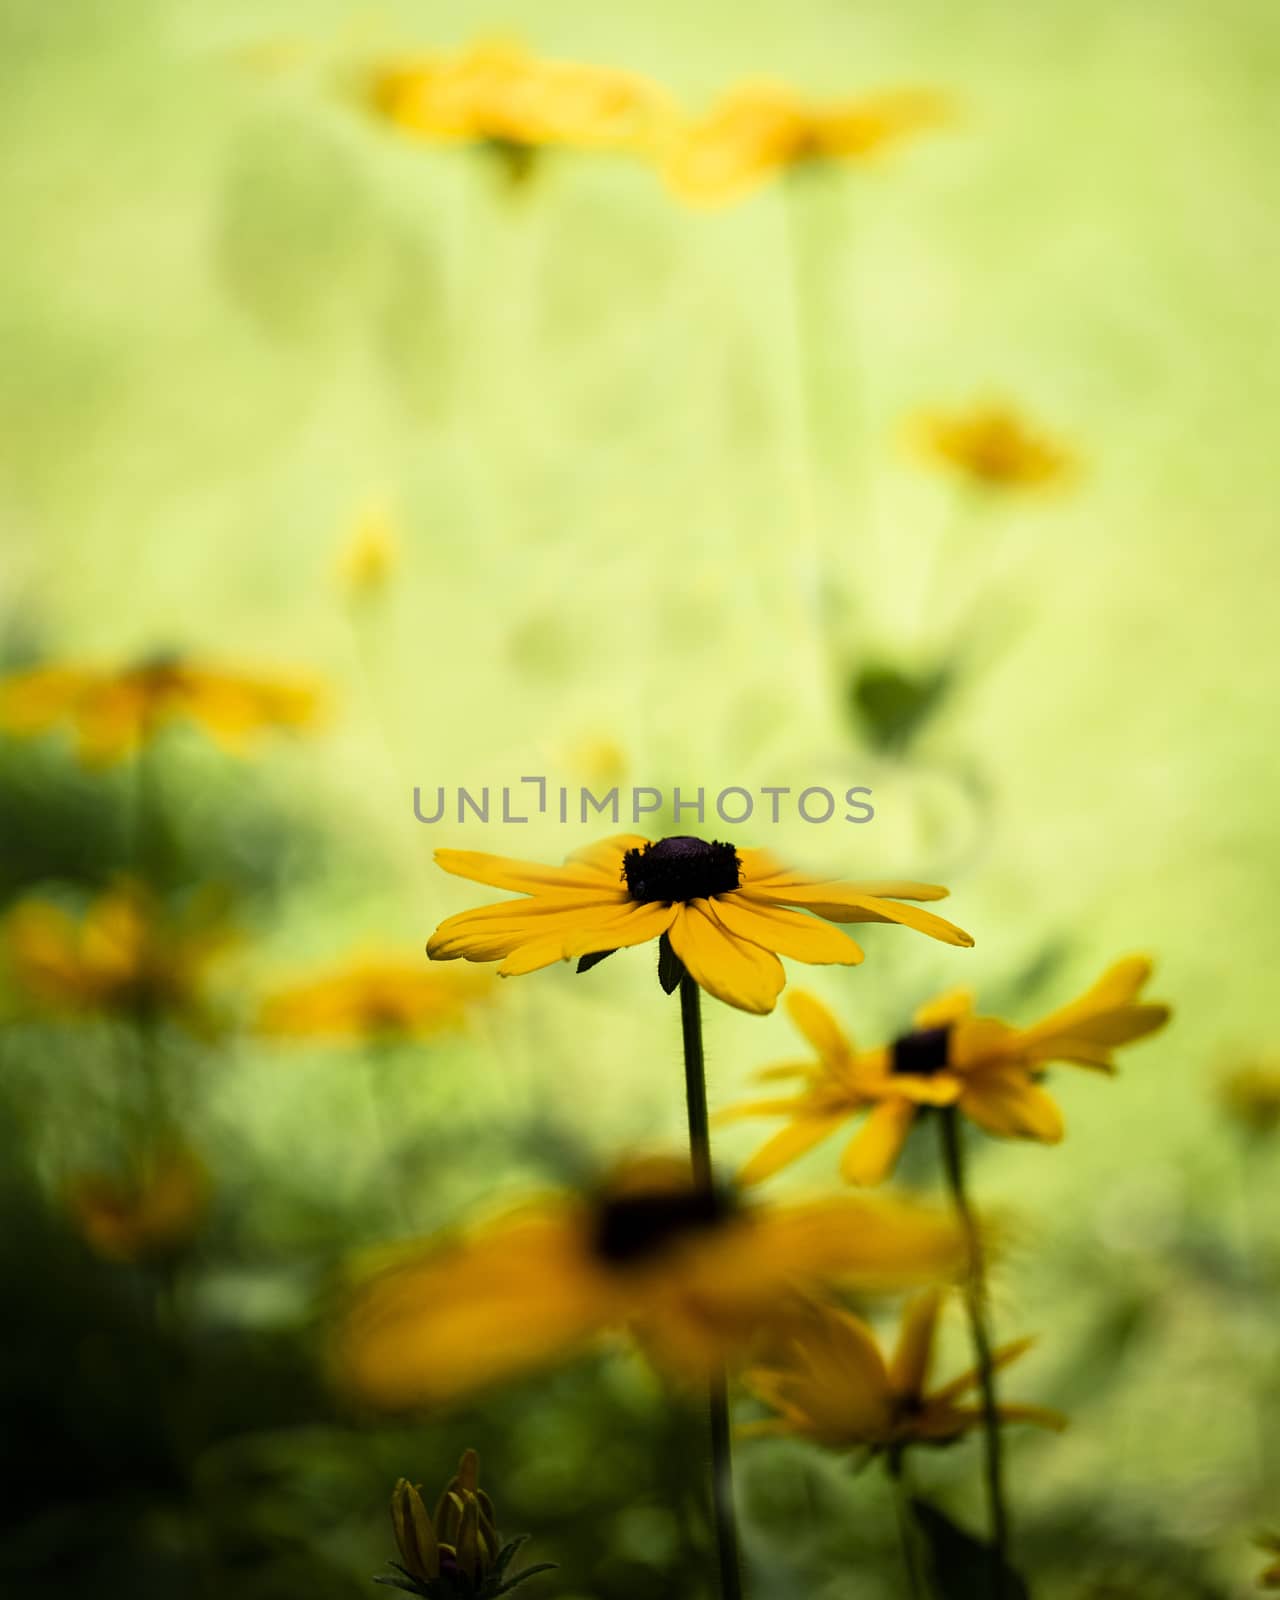 Ethereal view of a group of Black-eyed Susan flowers in the summer sun.